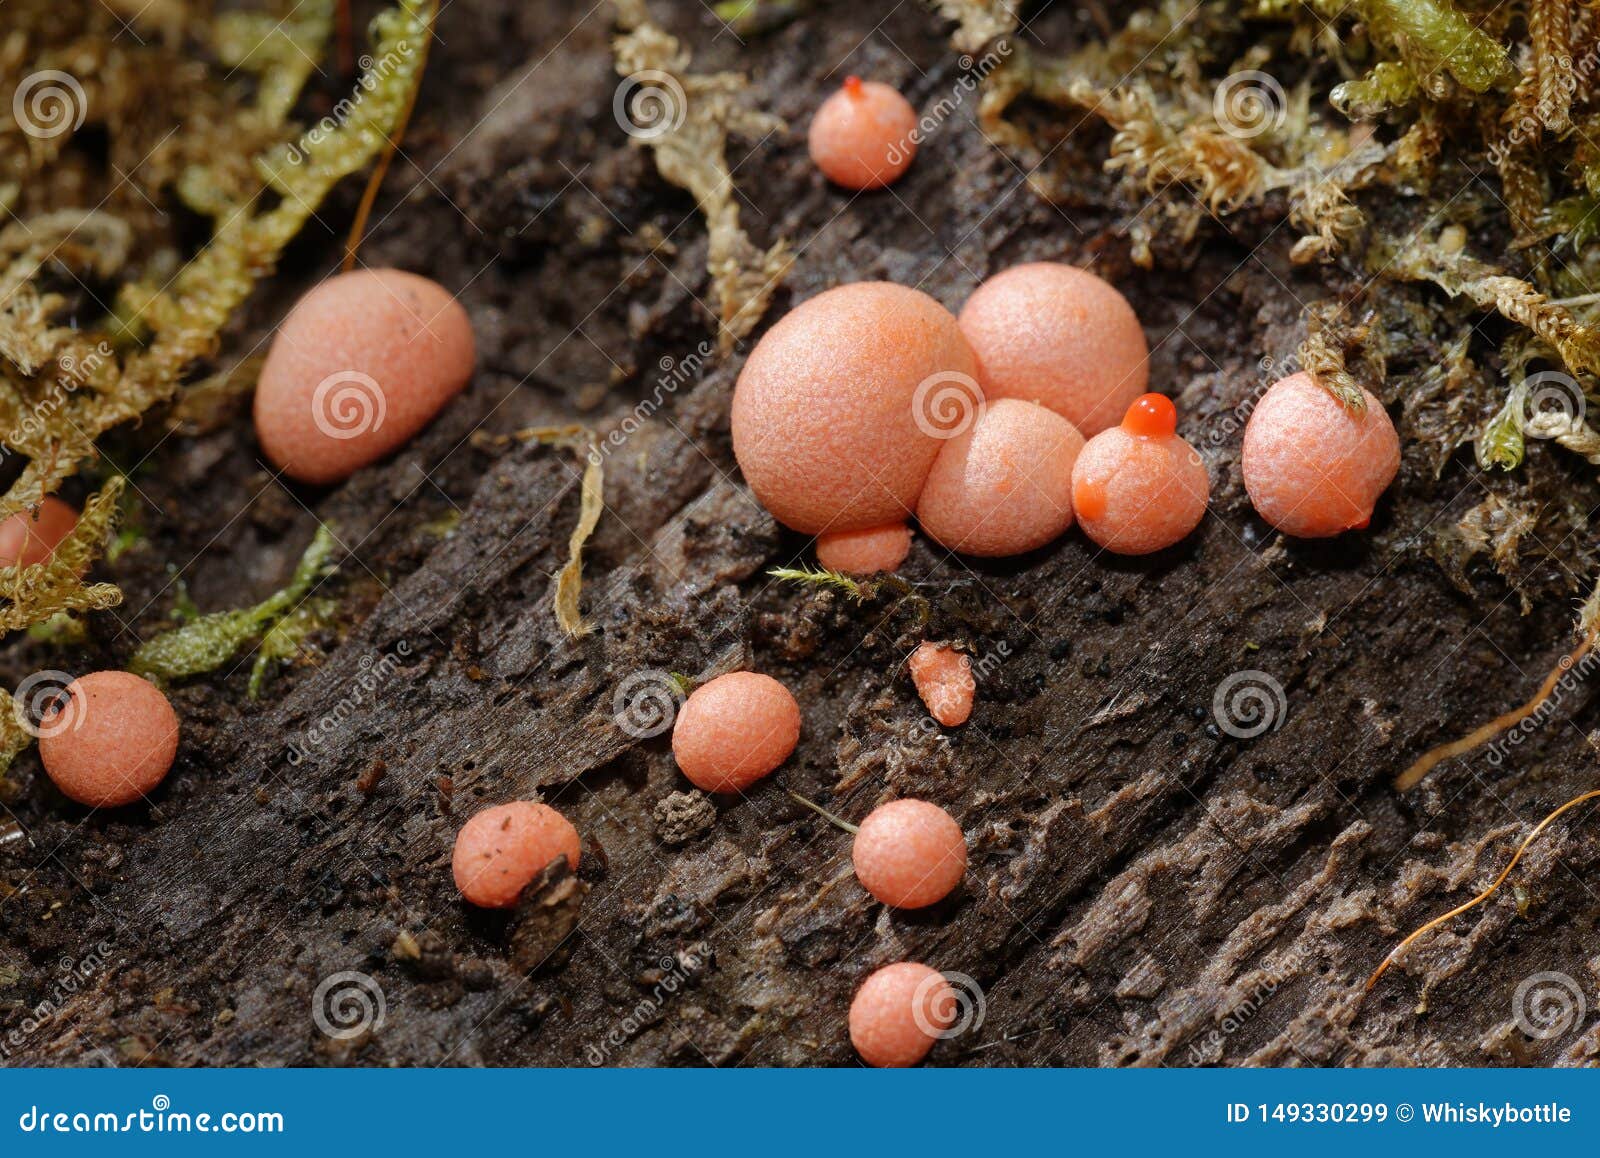 wolf`s milk slime mould